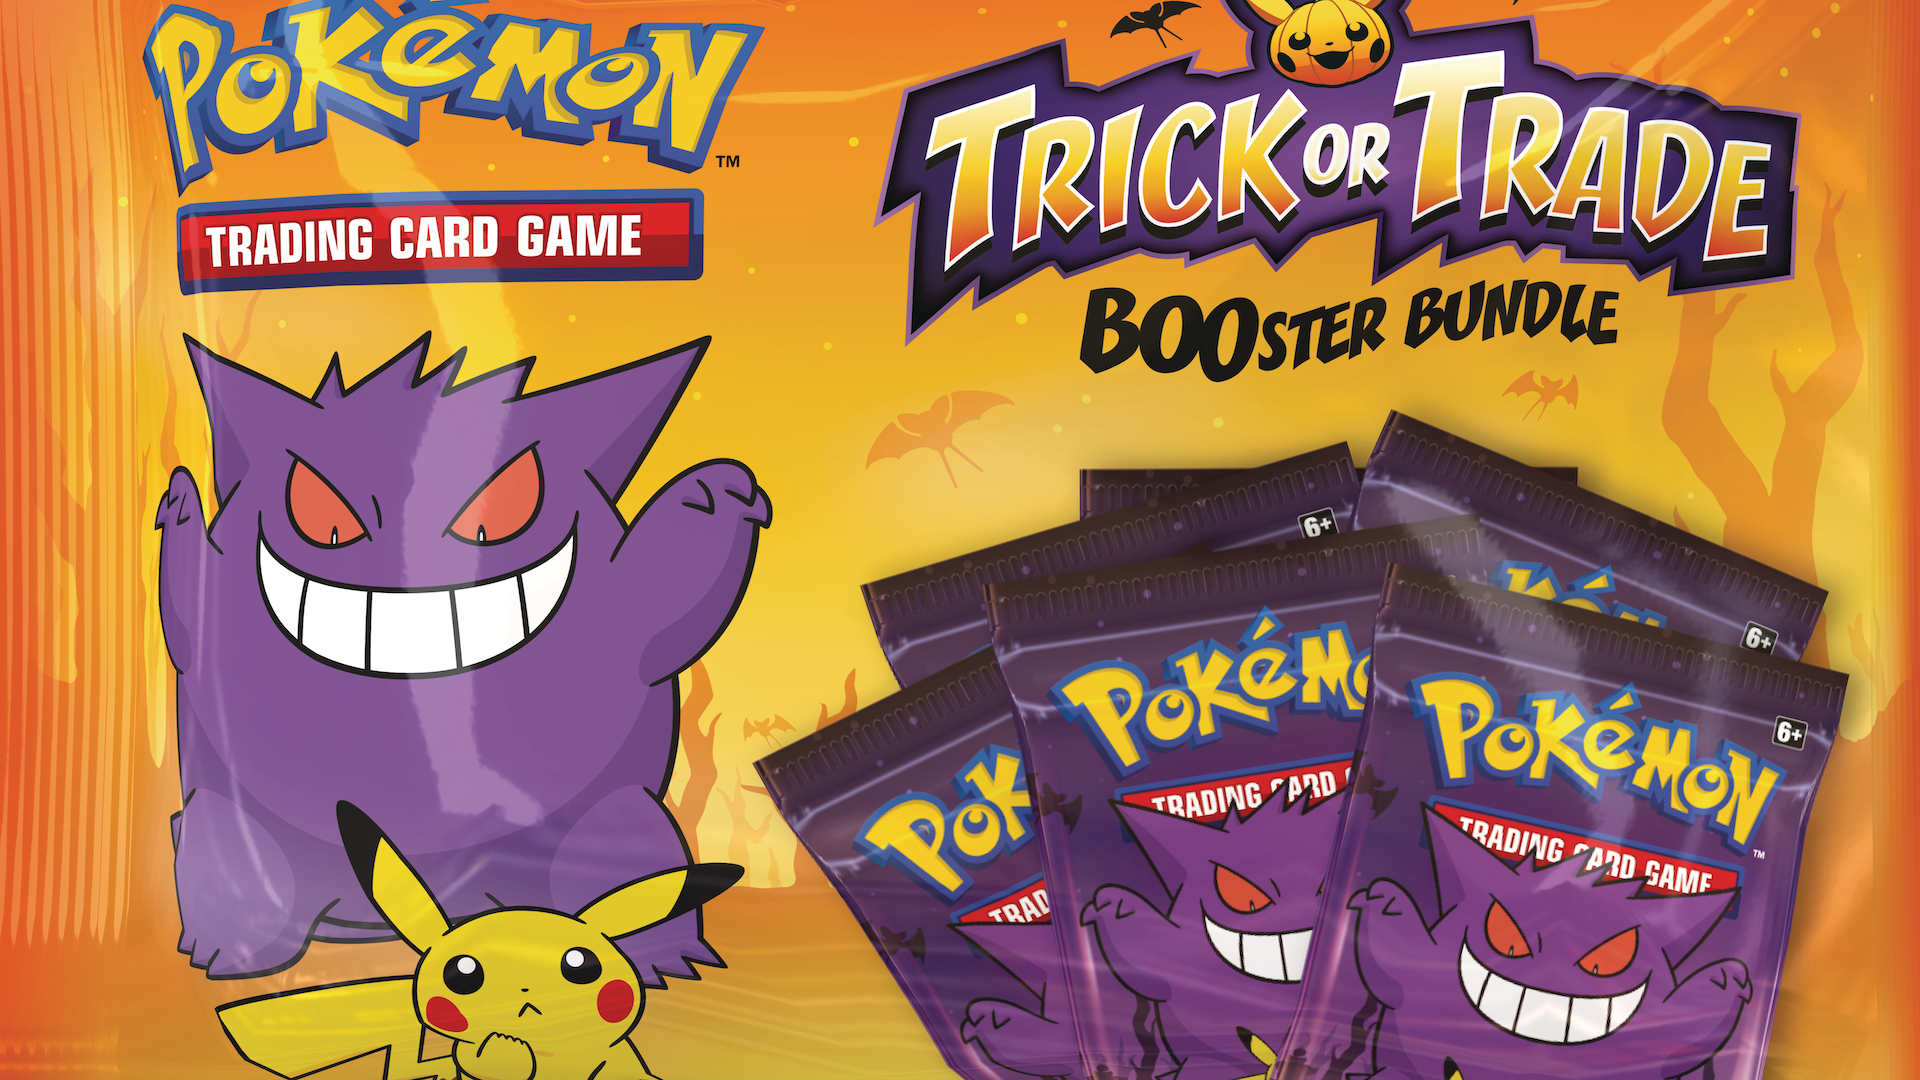 The packaging for the Pokémon Halloween Trick or Trade Boosters, with Gengar and Pikachu on the front. It's basically a bag of candy.